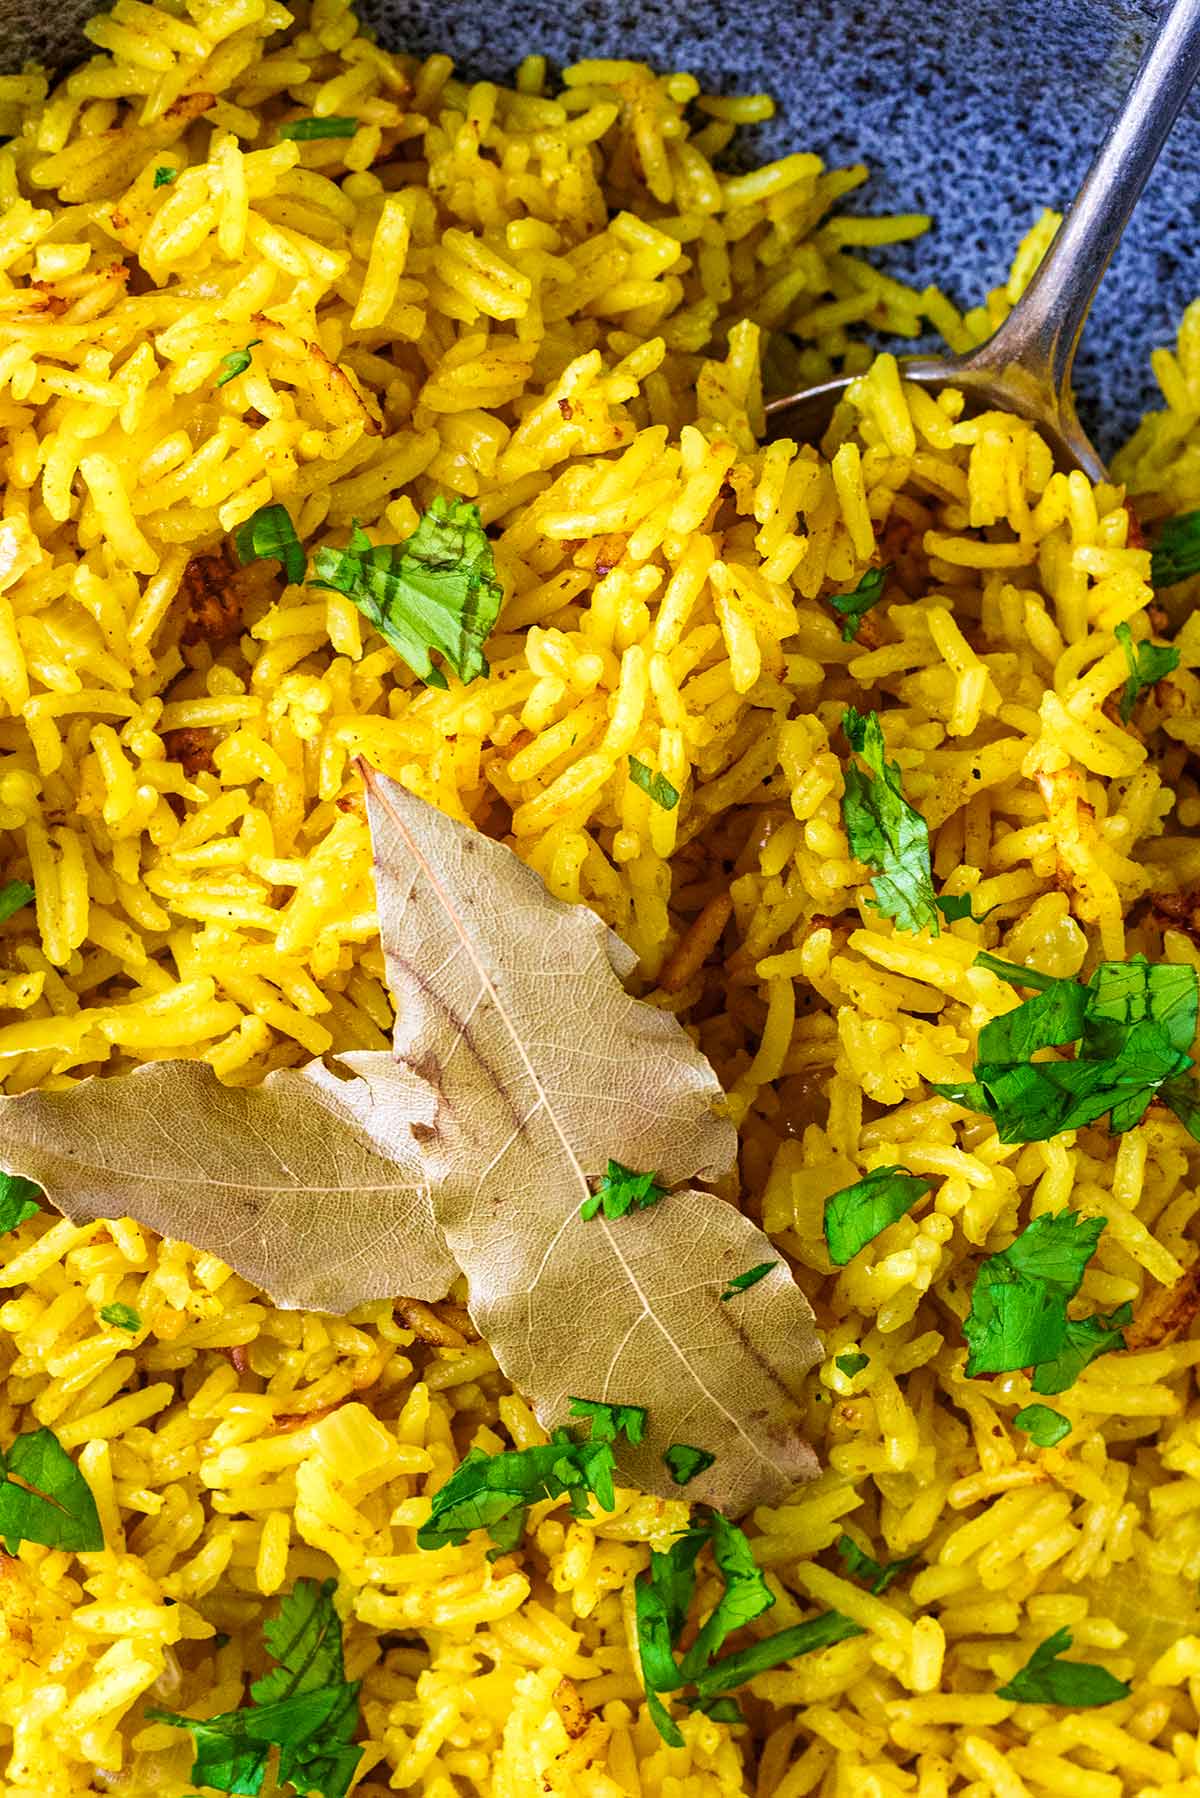 Two bay leaves sat on top of some pilau rice.